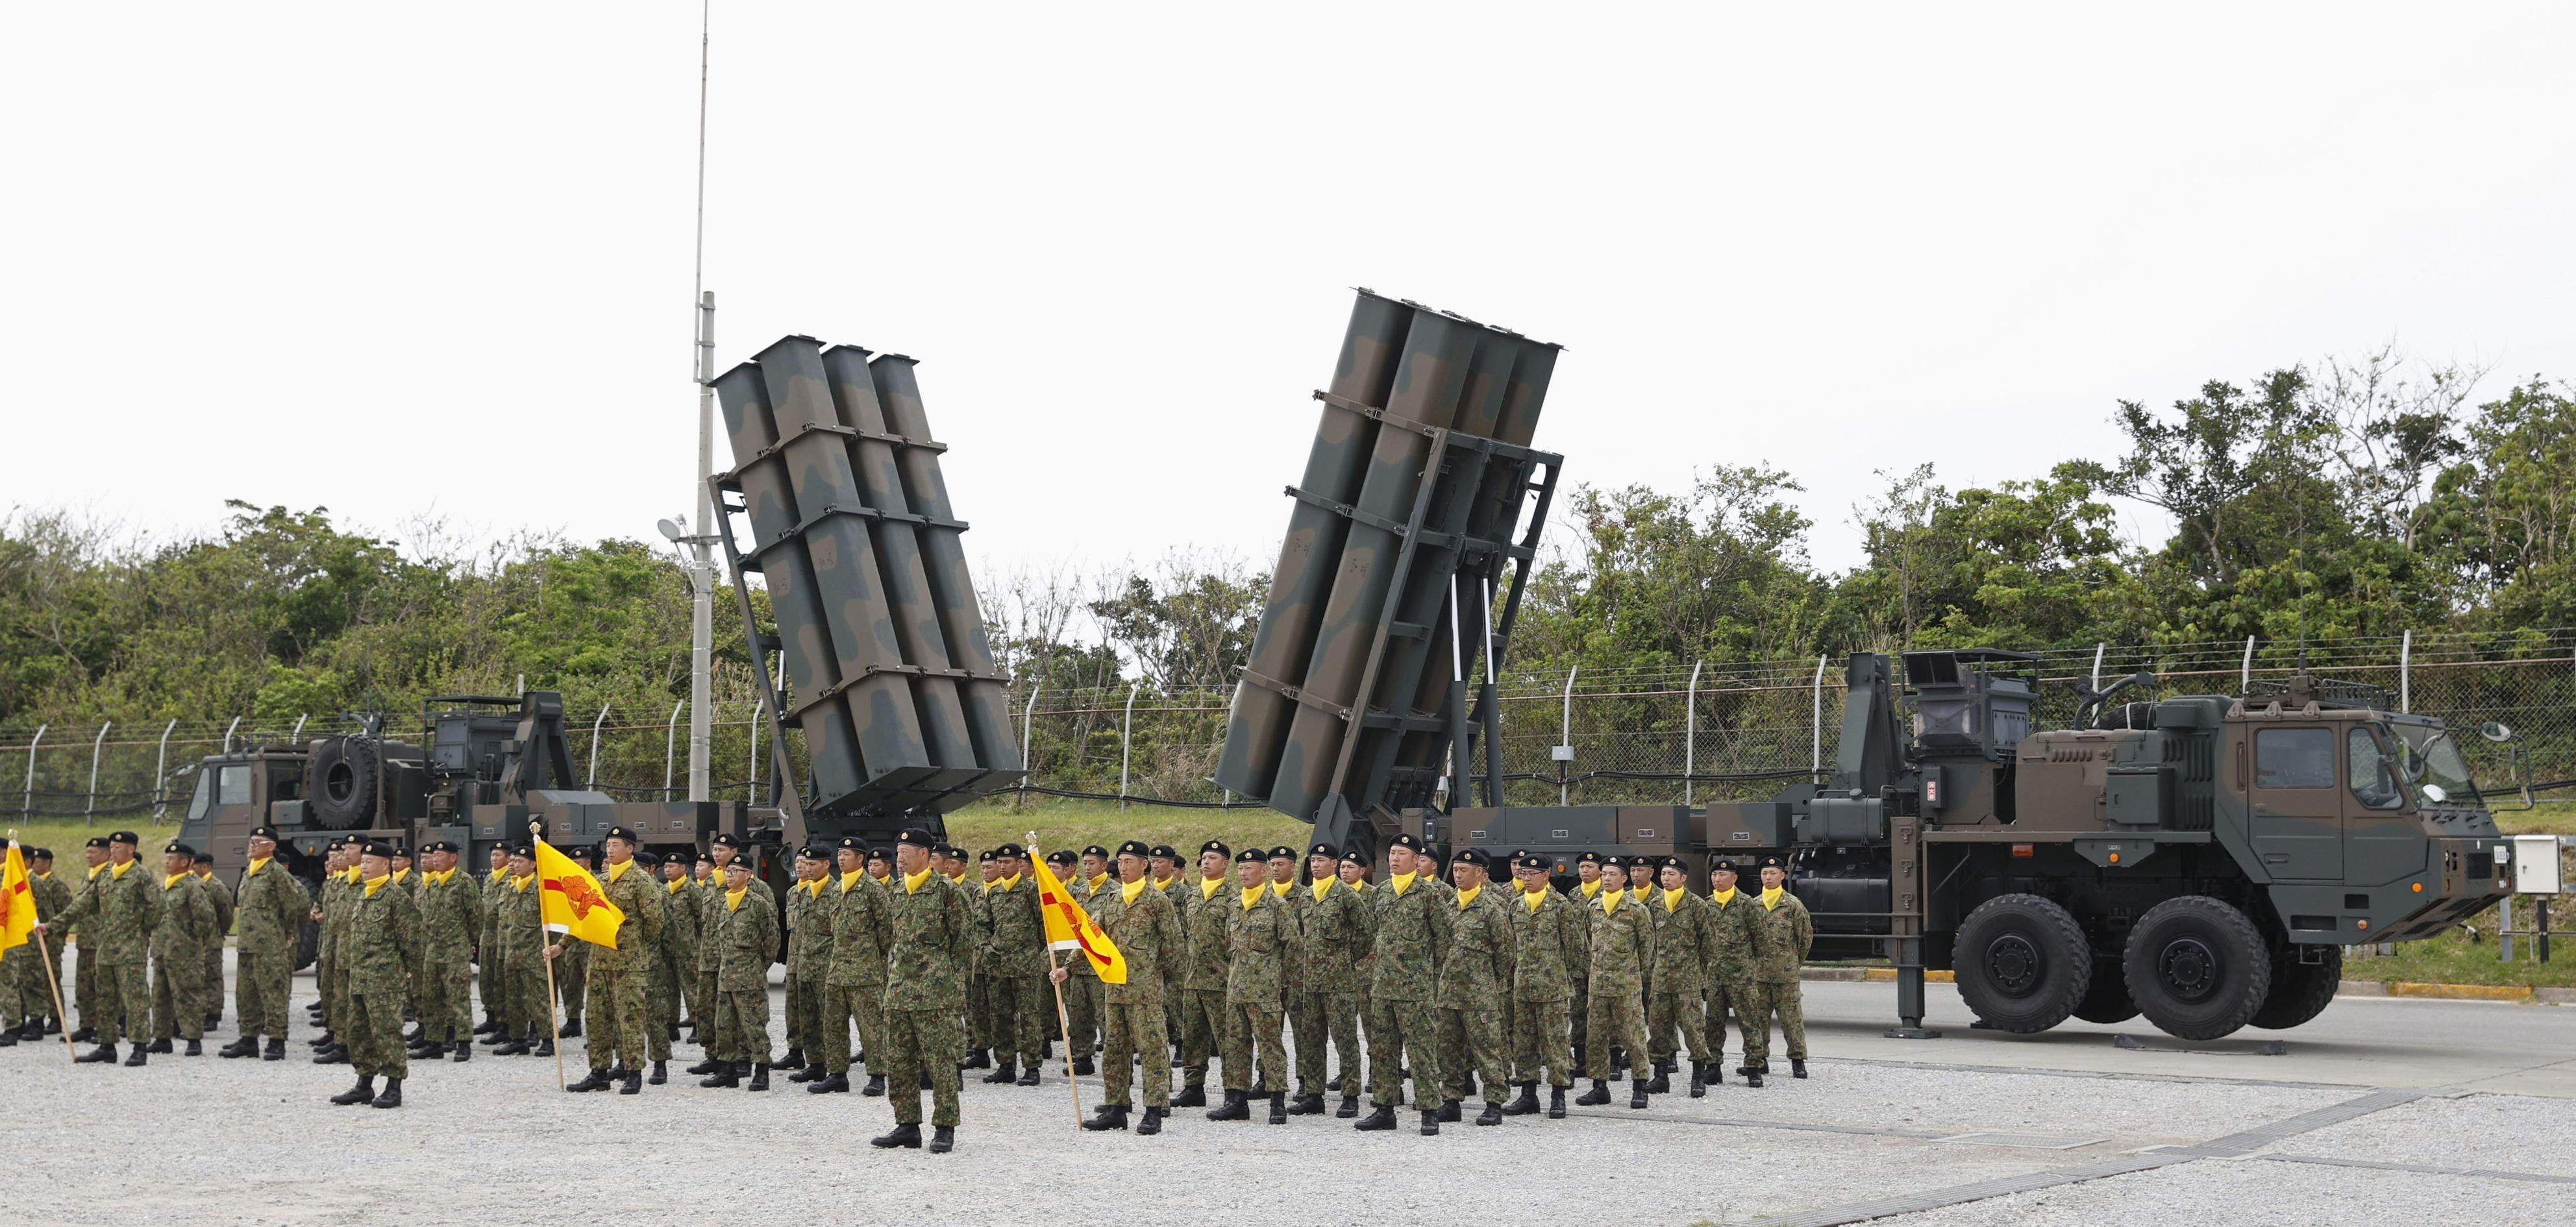 A Japanese military ceremony to mark the deployment of the missiles in Okinawa. Photo: Kyodo